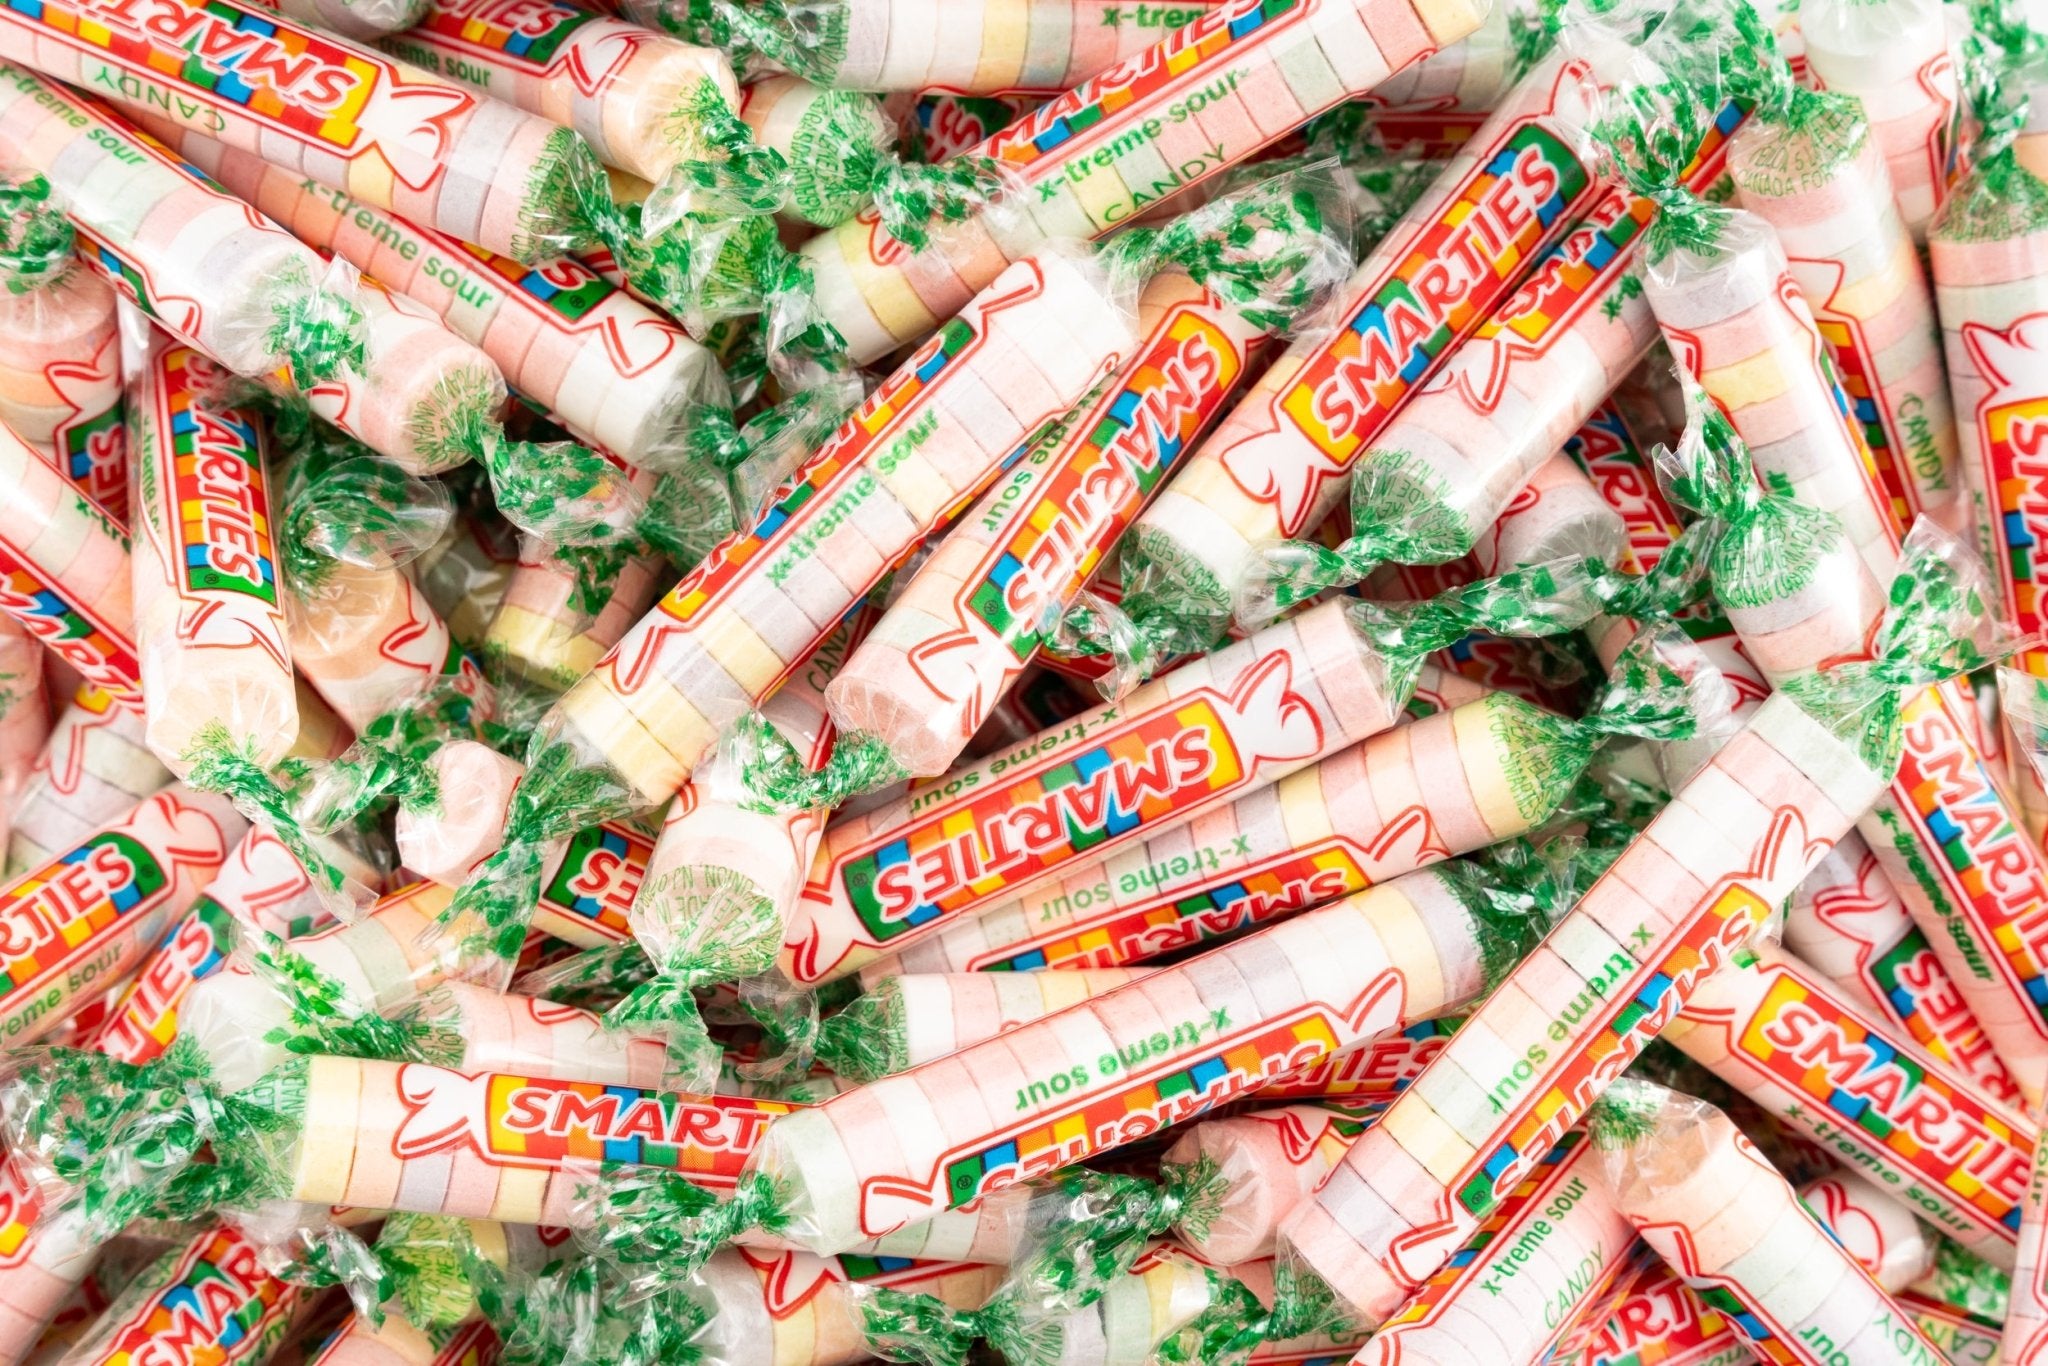 Extreme Sour Smarties .277 oz - Vintage Candy Co.